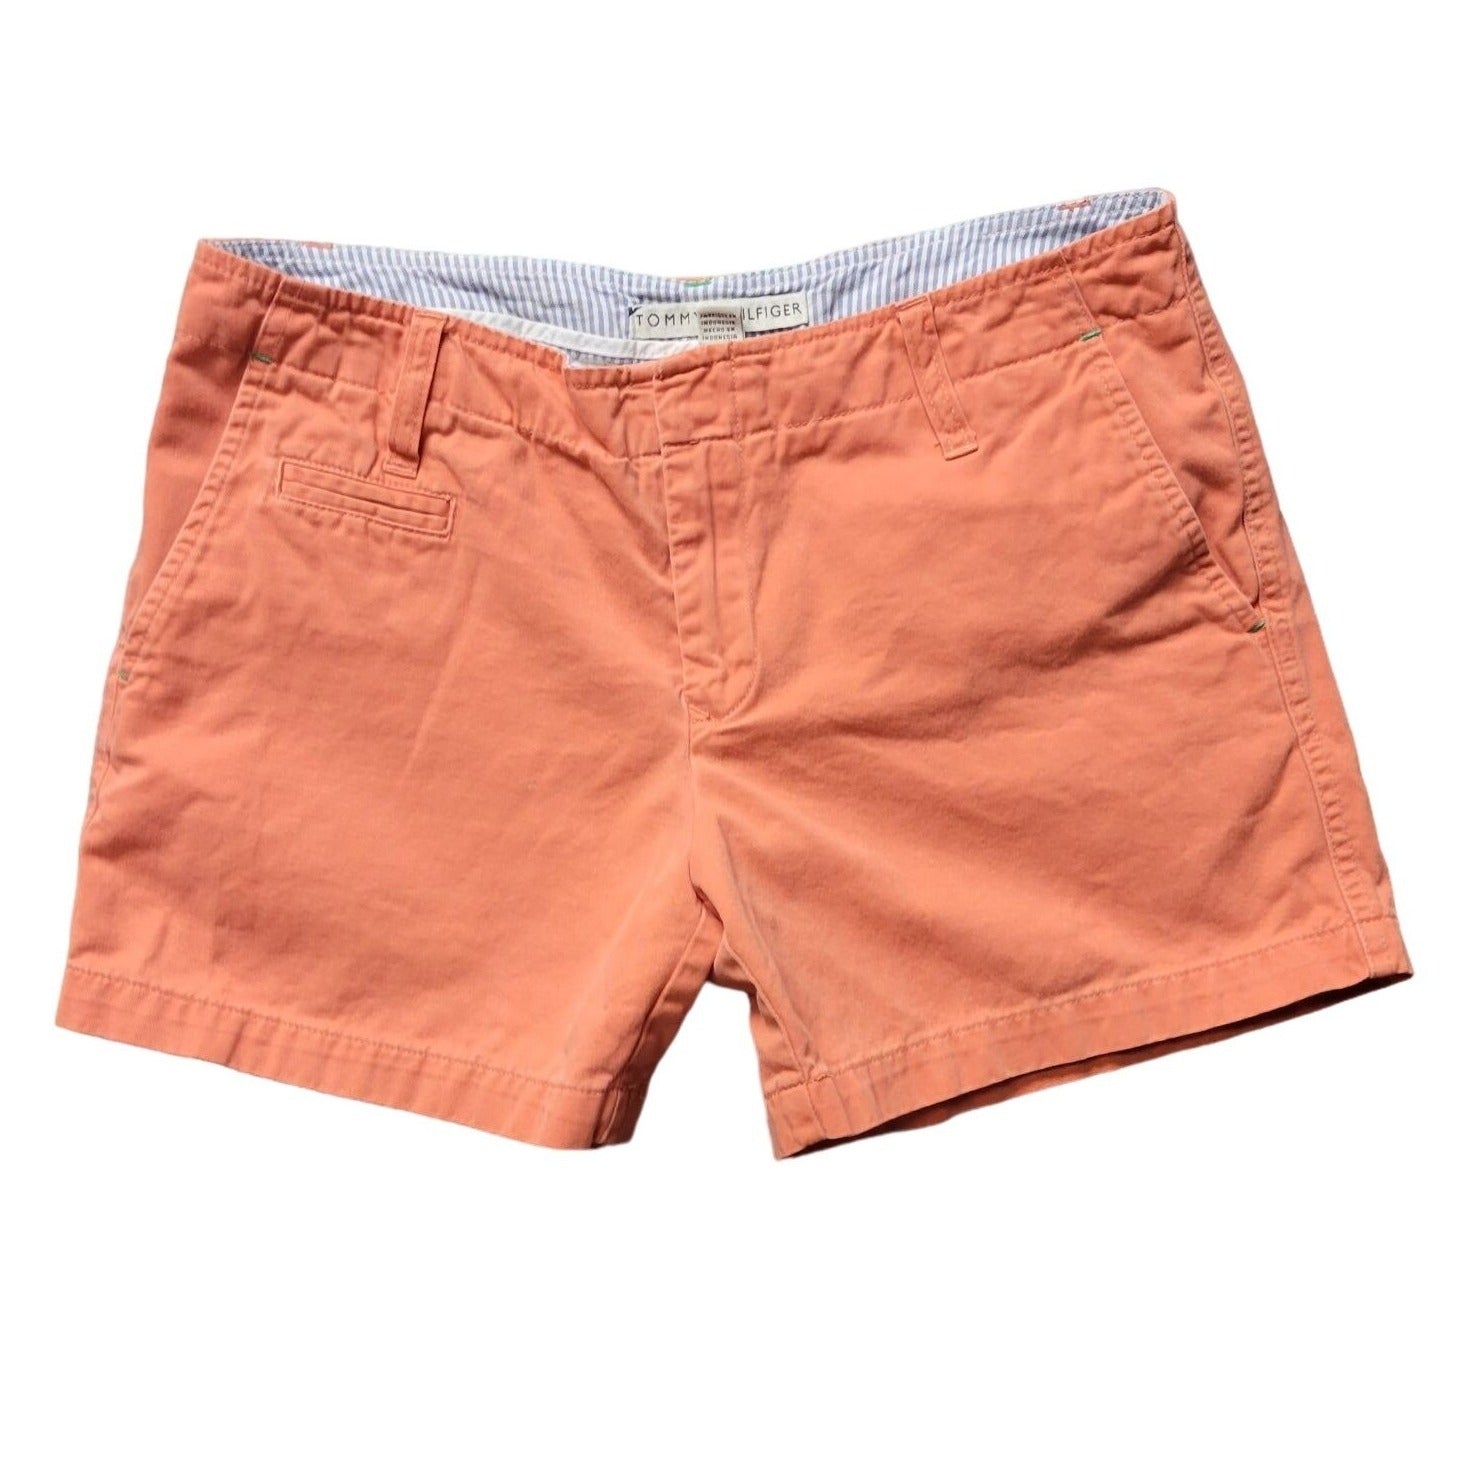 Tommy Hilfiger Women's Coral Color, Cotton, Casual Shorts, Size 4